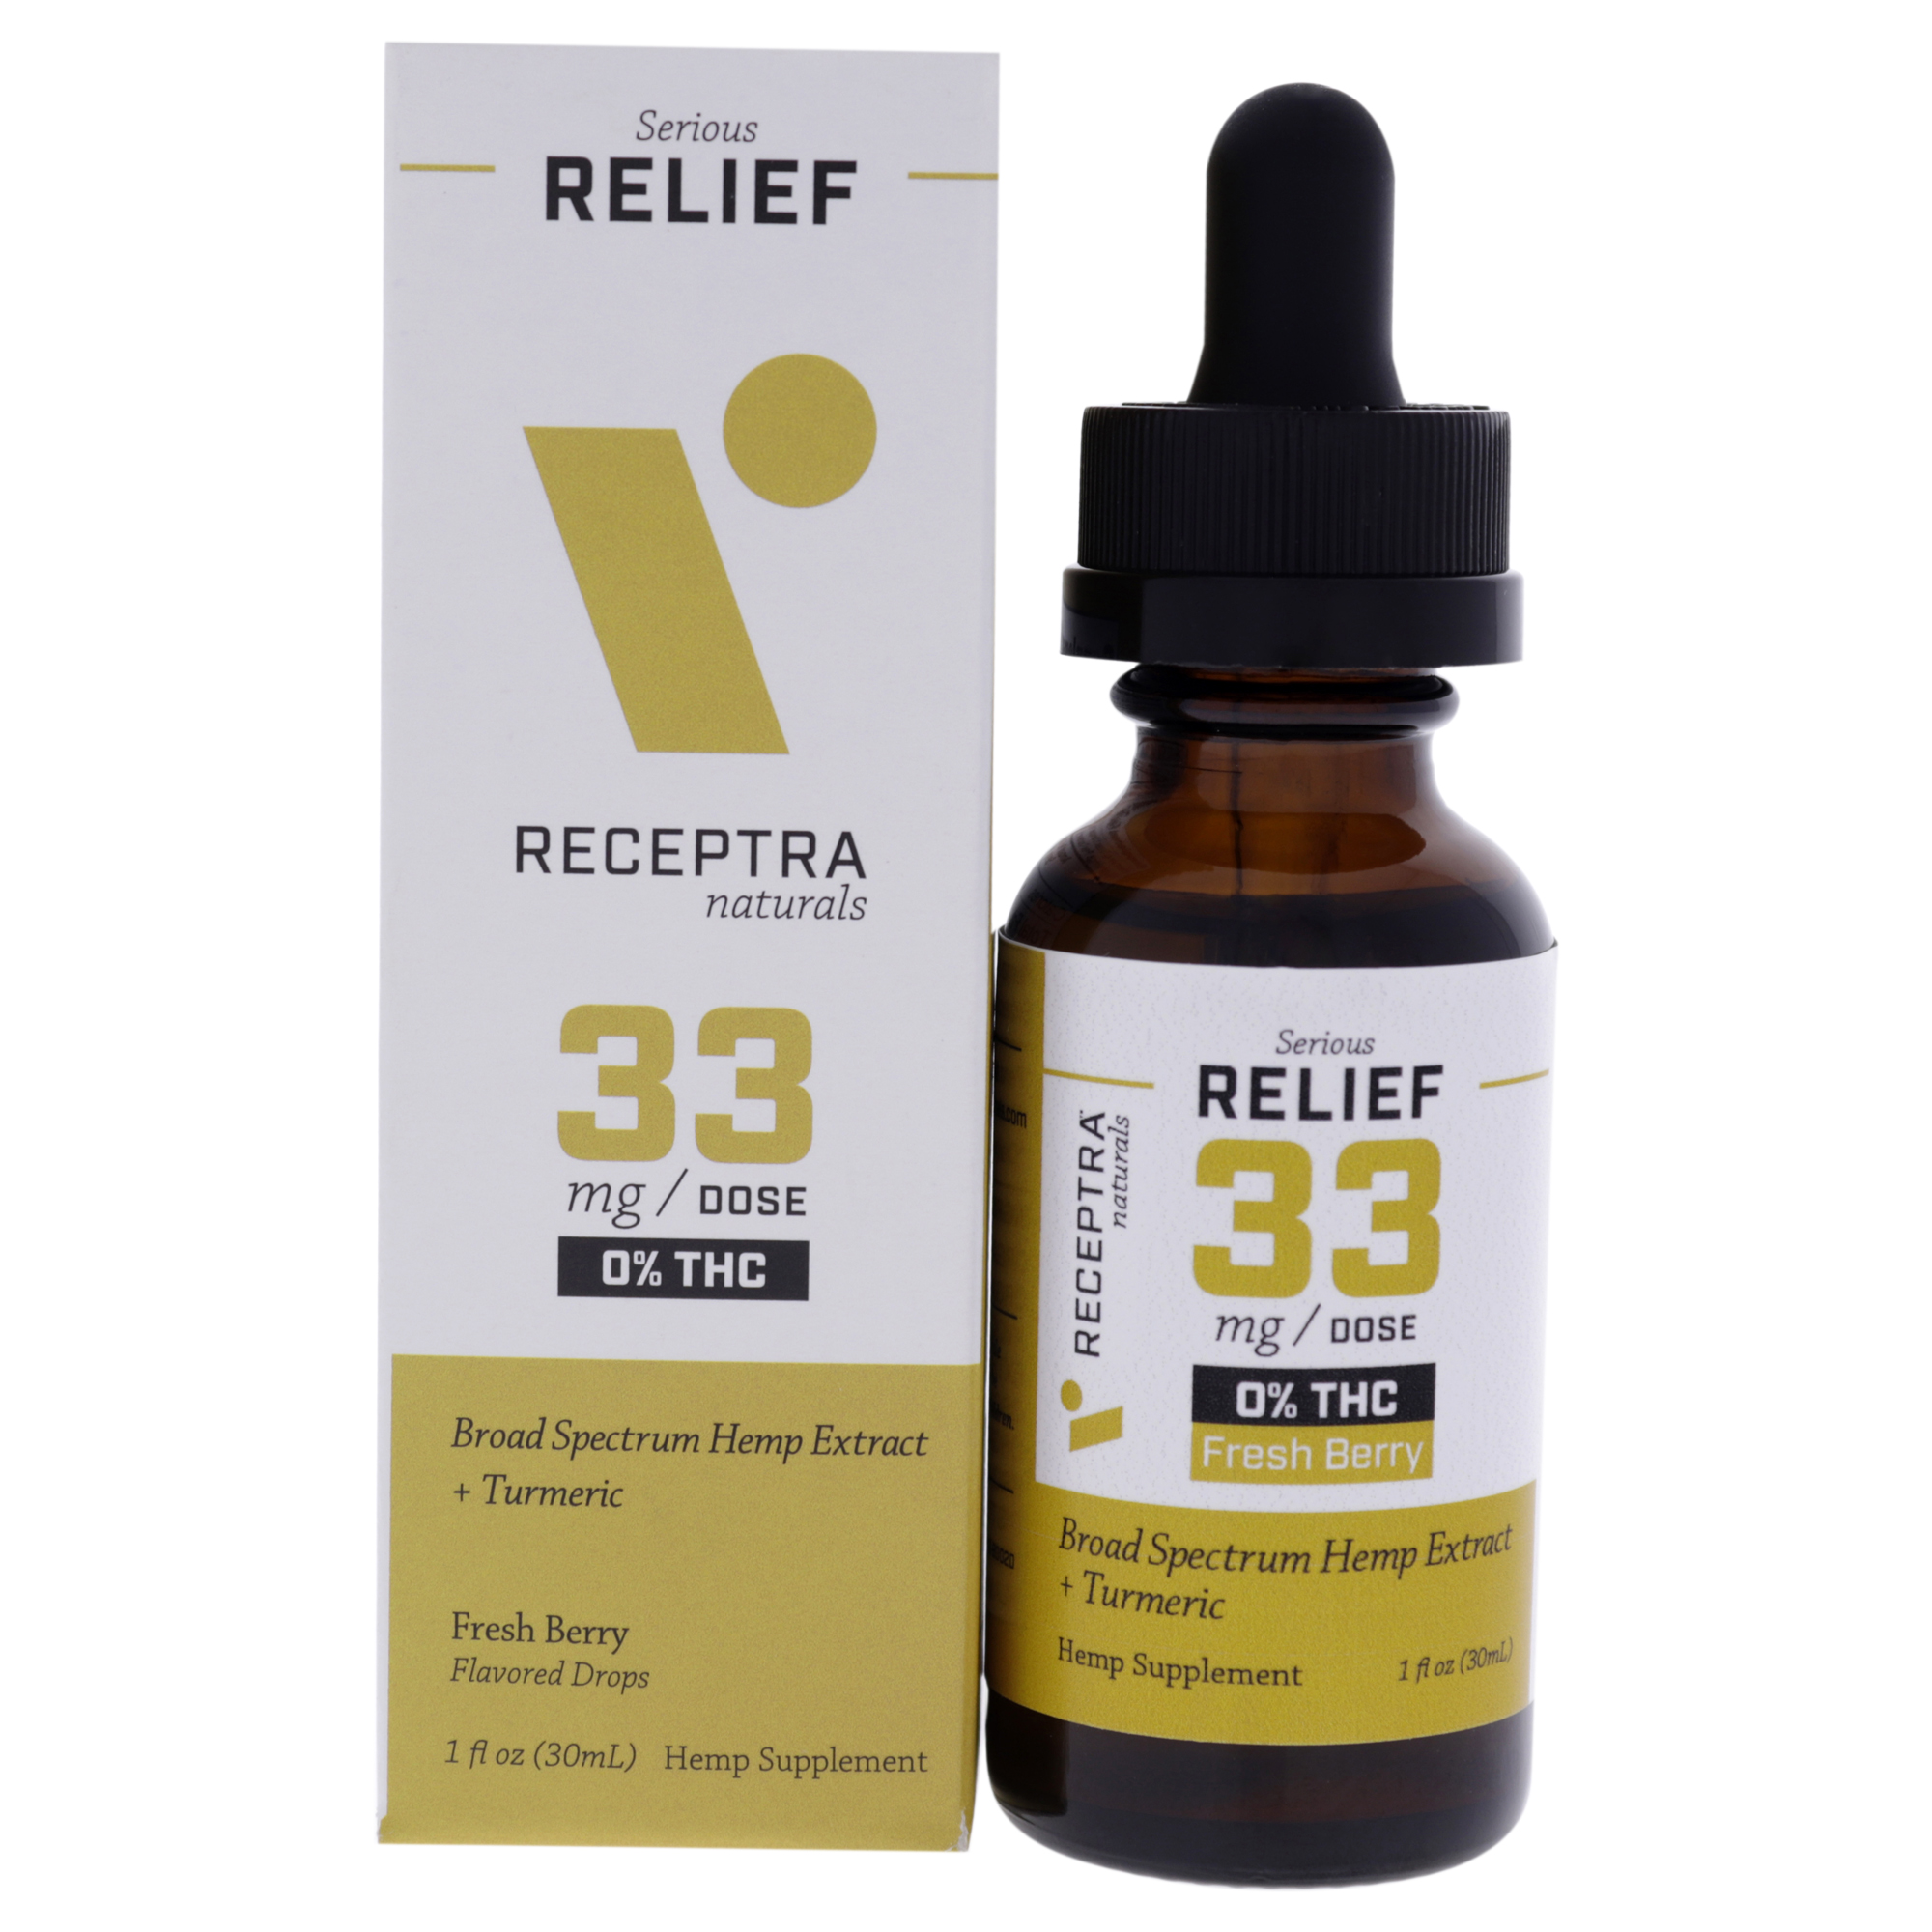 Serious Relief 33mg Or percent THC Drops - Fresh Berry by Receptra Naturals for Unisex - 1 oz Tincture